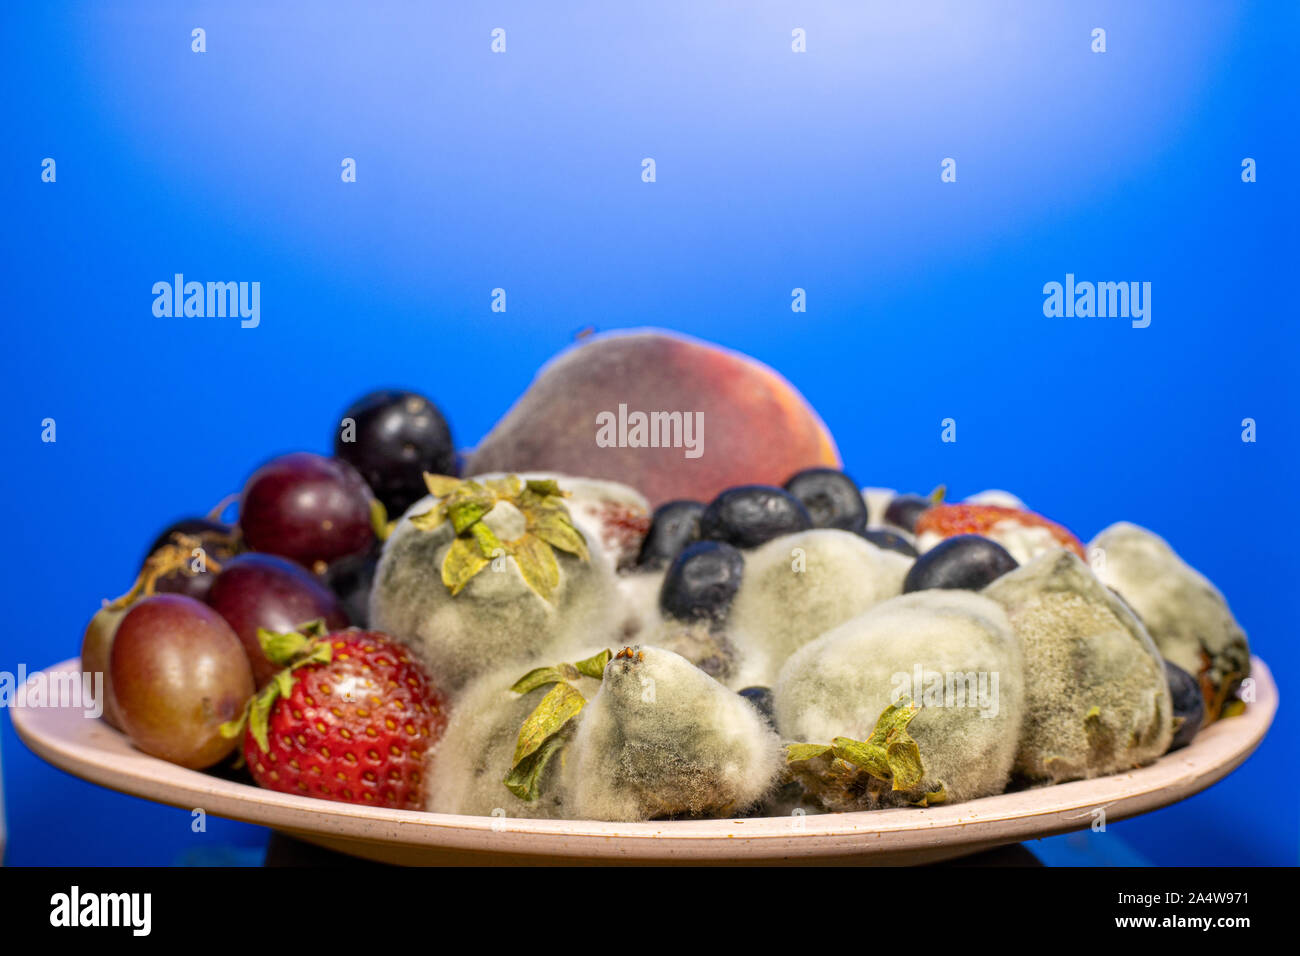 Fruits and berries in a cup rotted and moldy Stock Photo